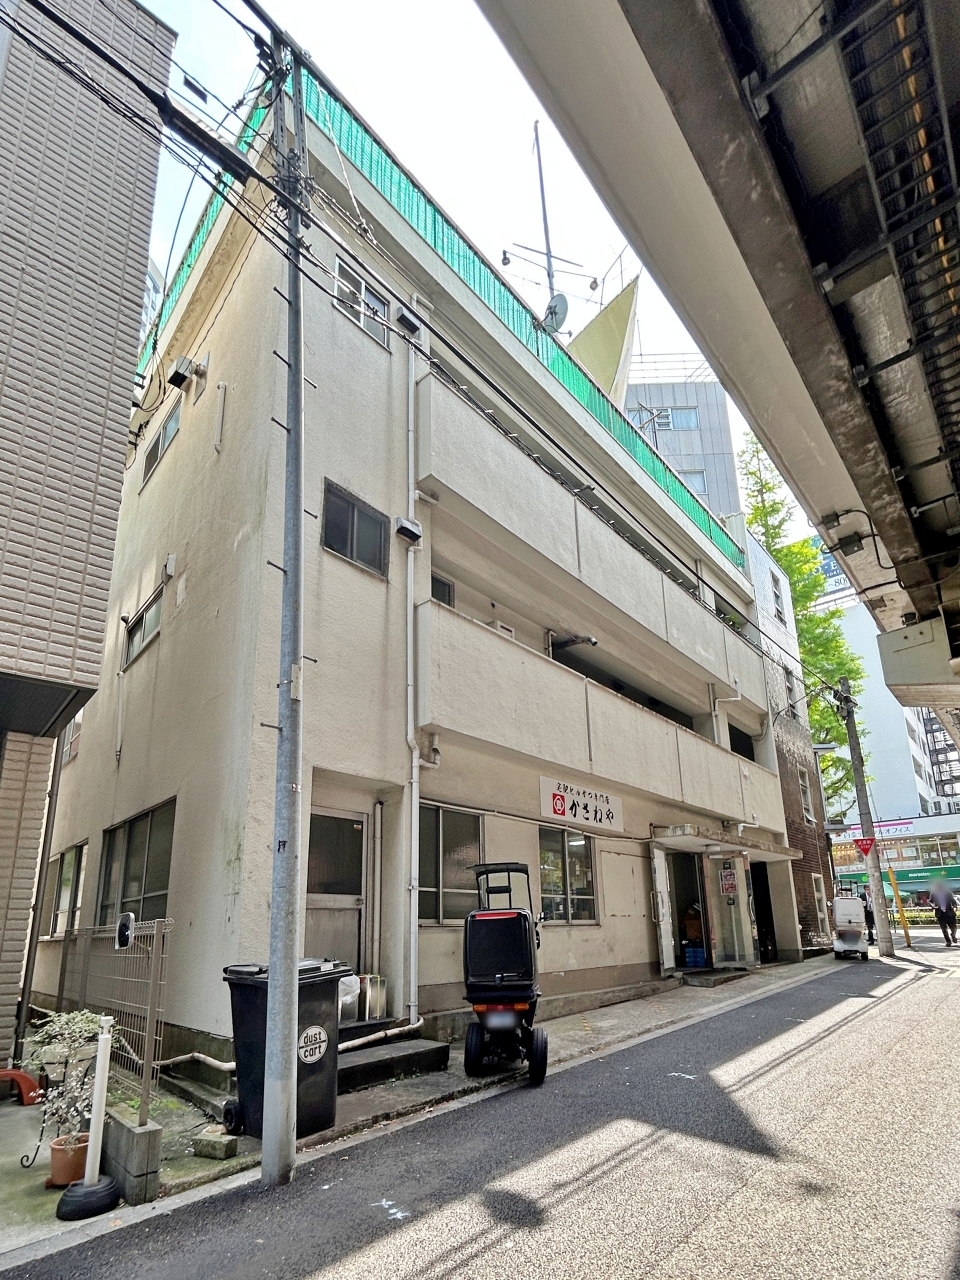 The 2nd Tokobuilding